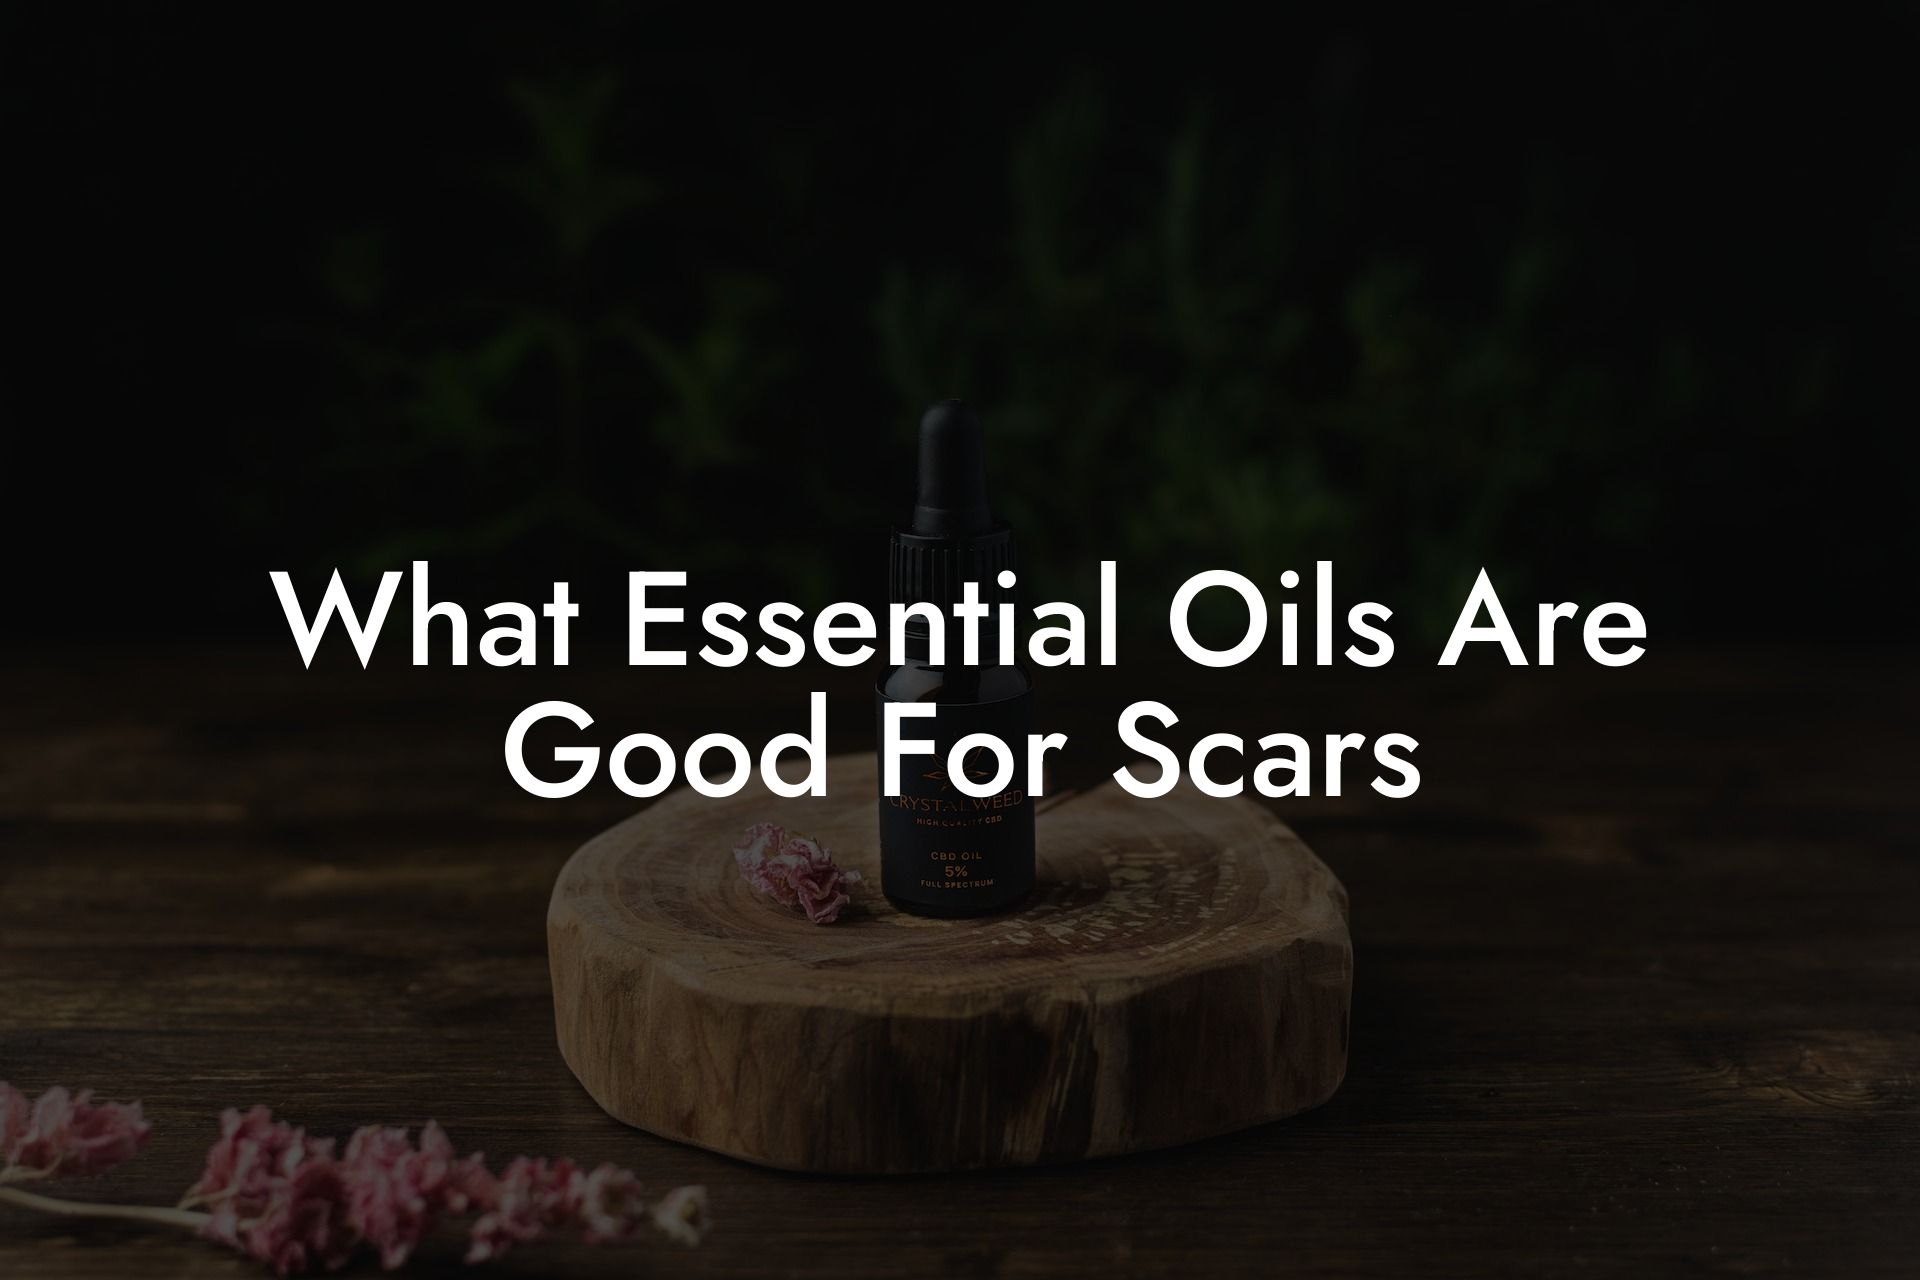 What Essential Oils Are Good For Scars